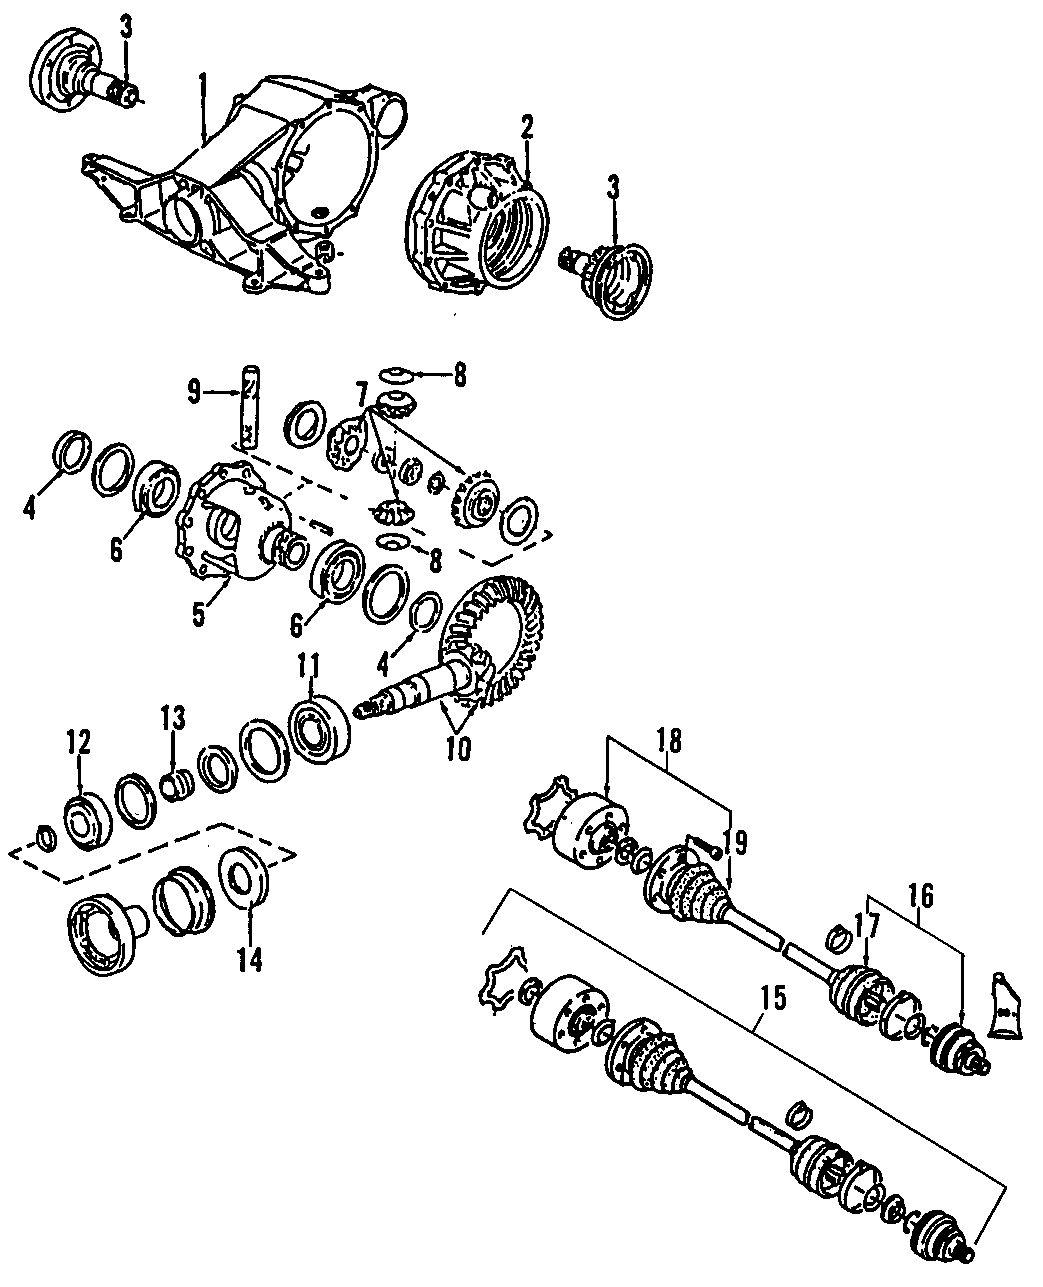 13DRIVE AXLES. REAR AXLE. AXLE SHAFTS & JOINTS. DIFFERENTIAL. PROPELLER SHAFT.https://images.simplepart.com/images/parts/motor/fullsize/F220090.png